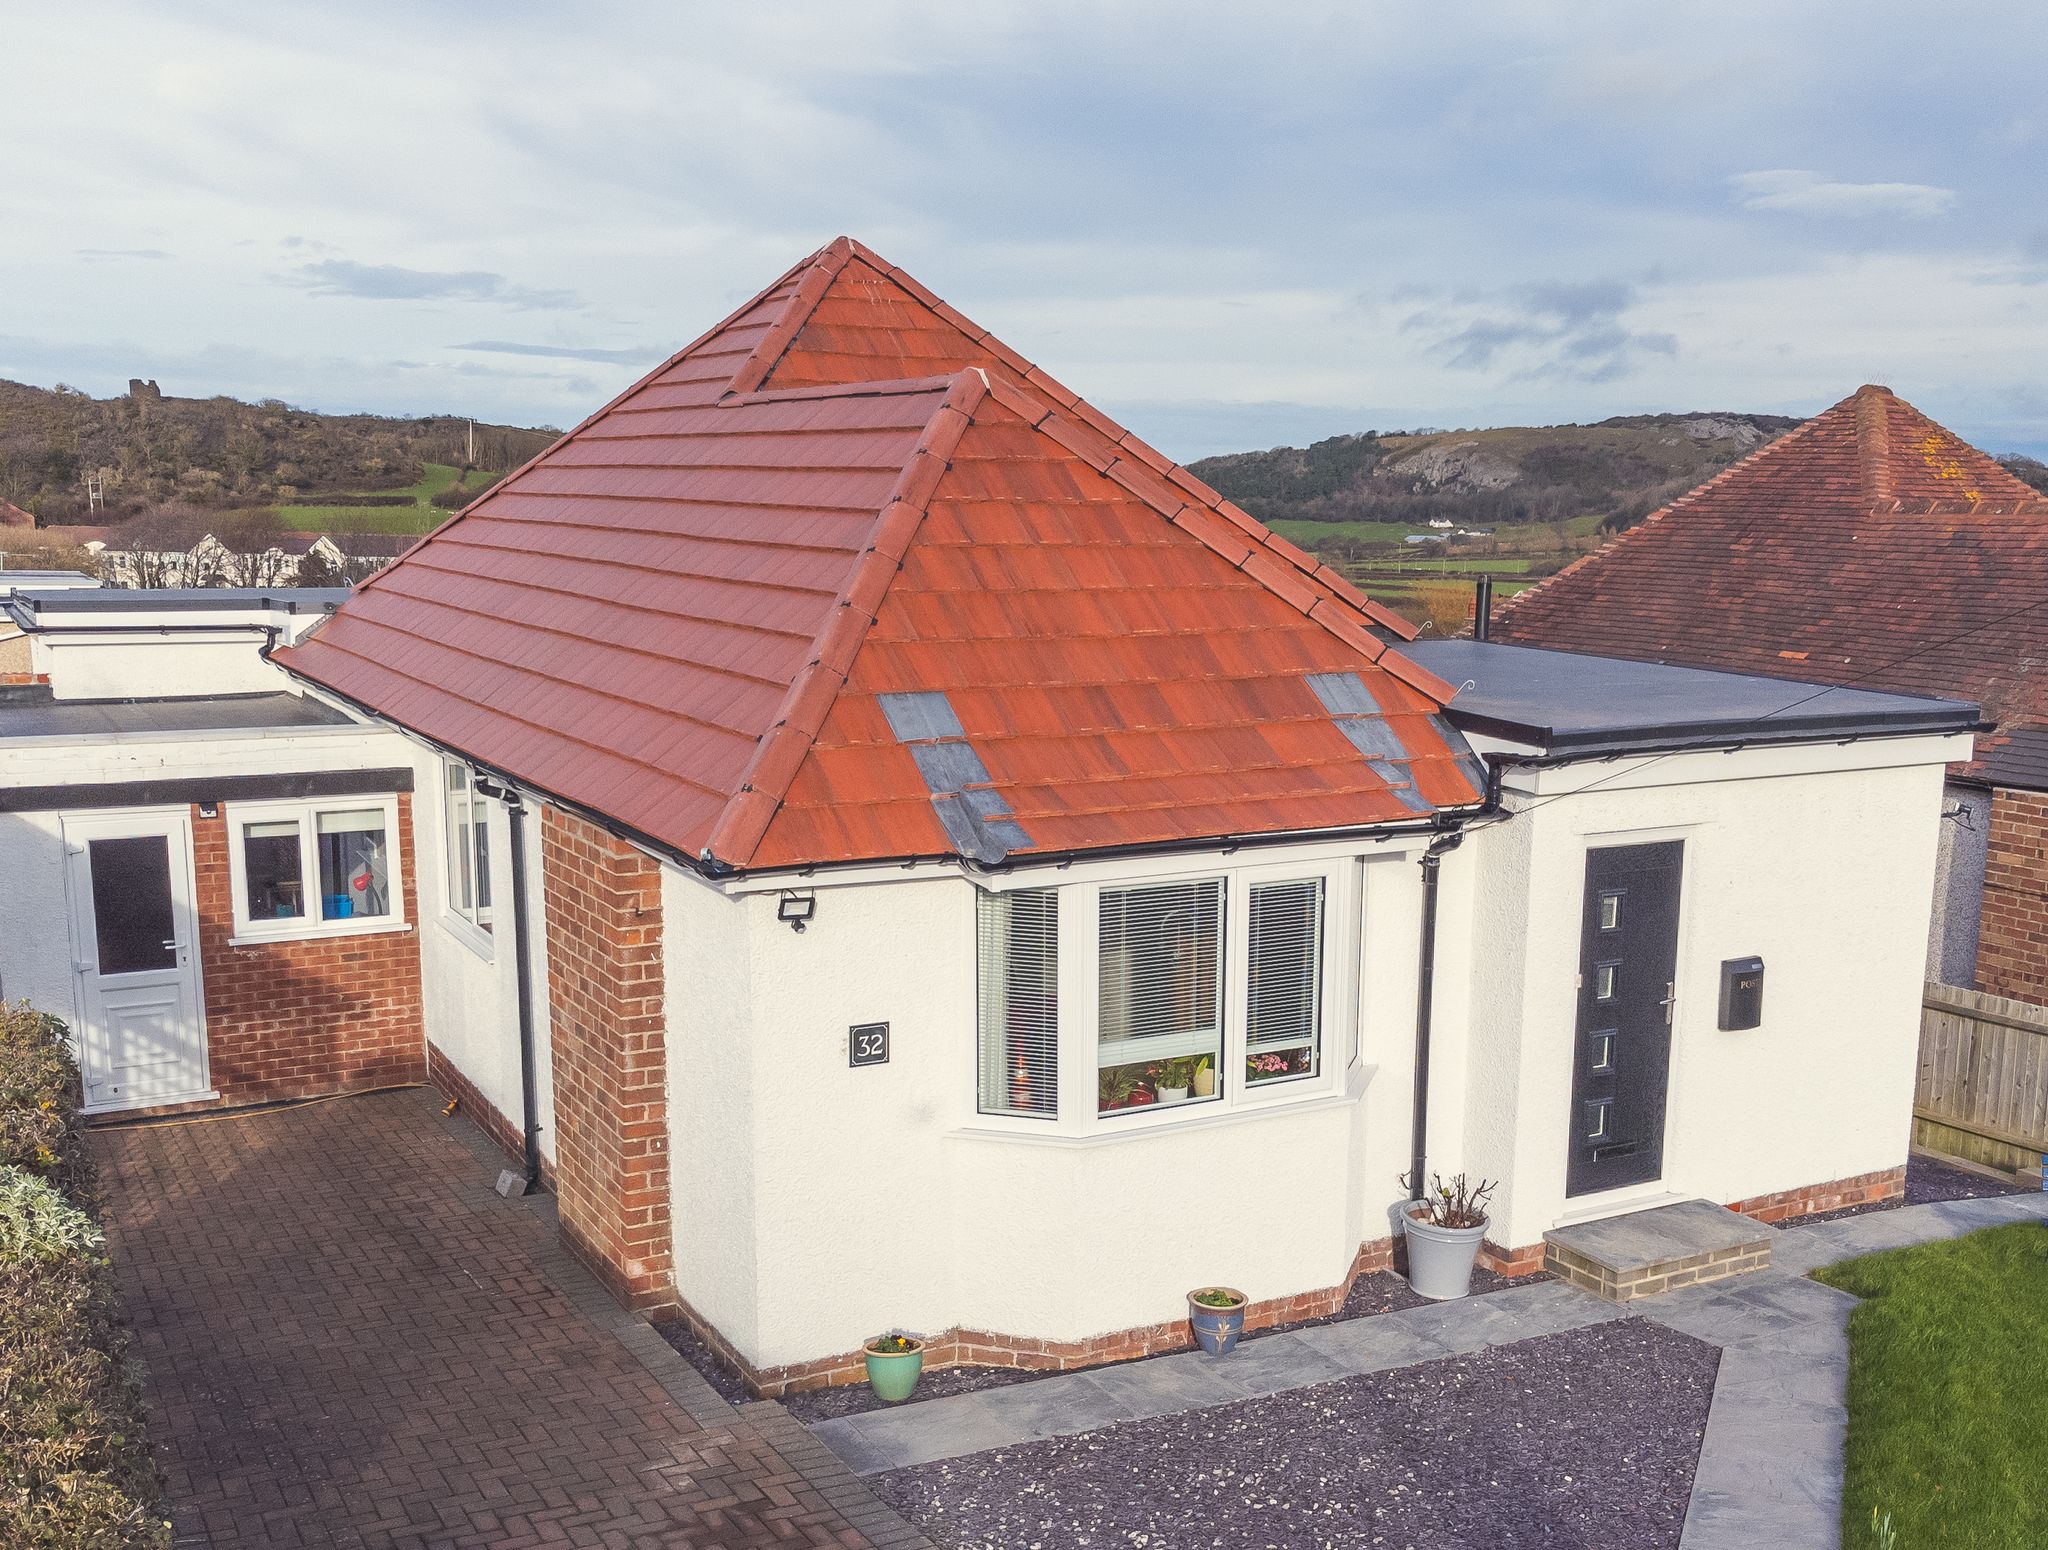 Tile Roof Contractors Hên-durnpike, LL57 - DD Roofing